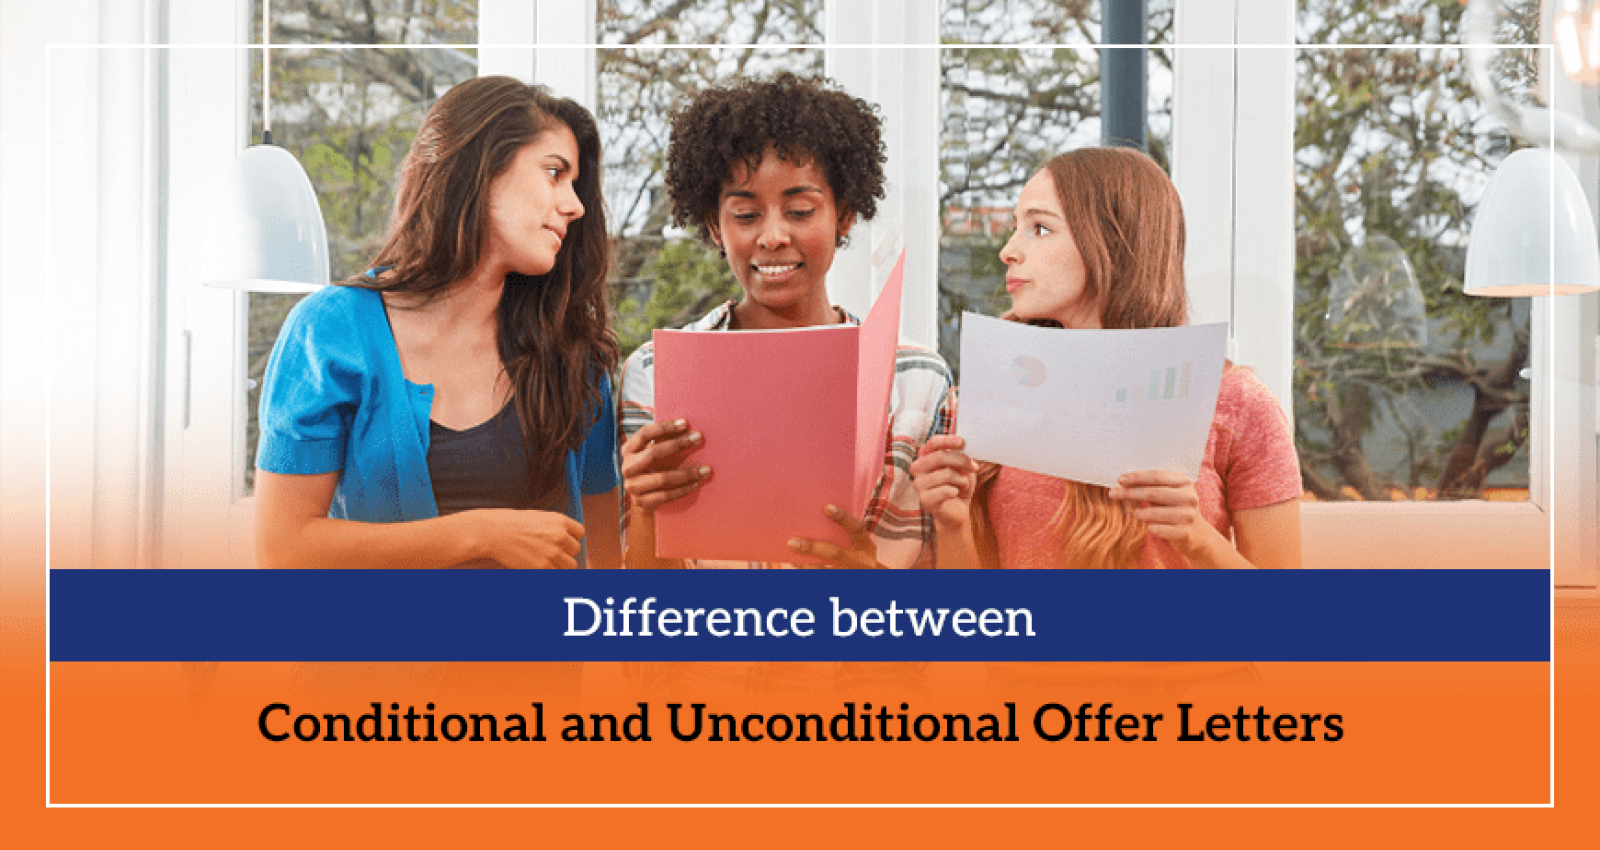 Difference between Conditional and Unconditional Offer Letters